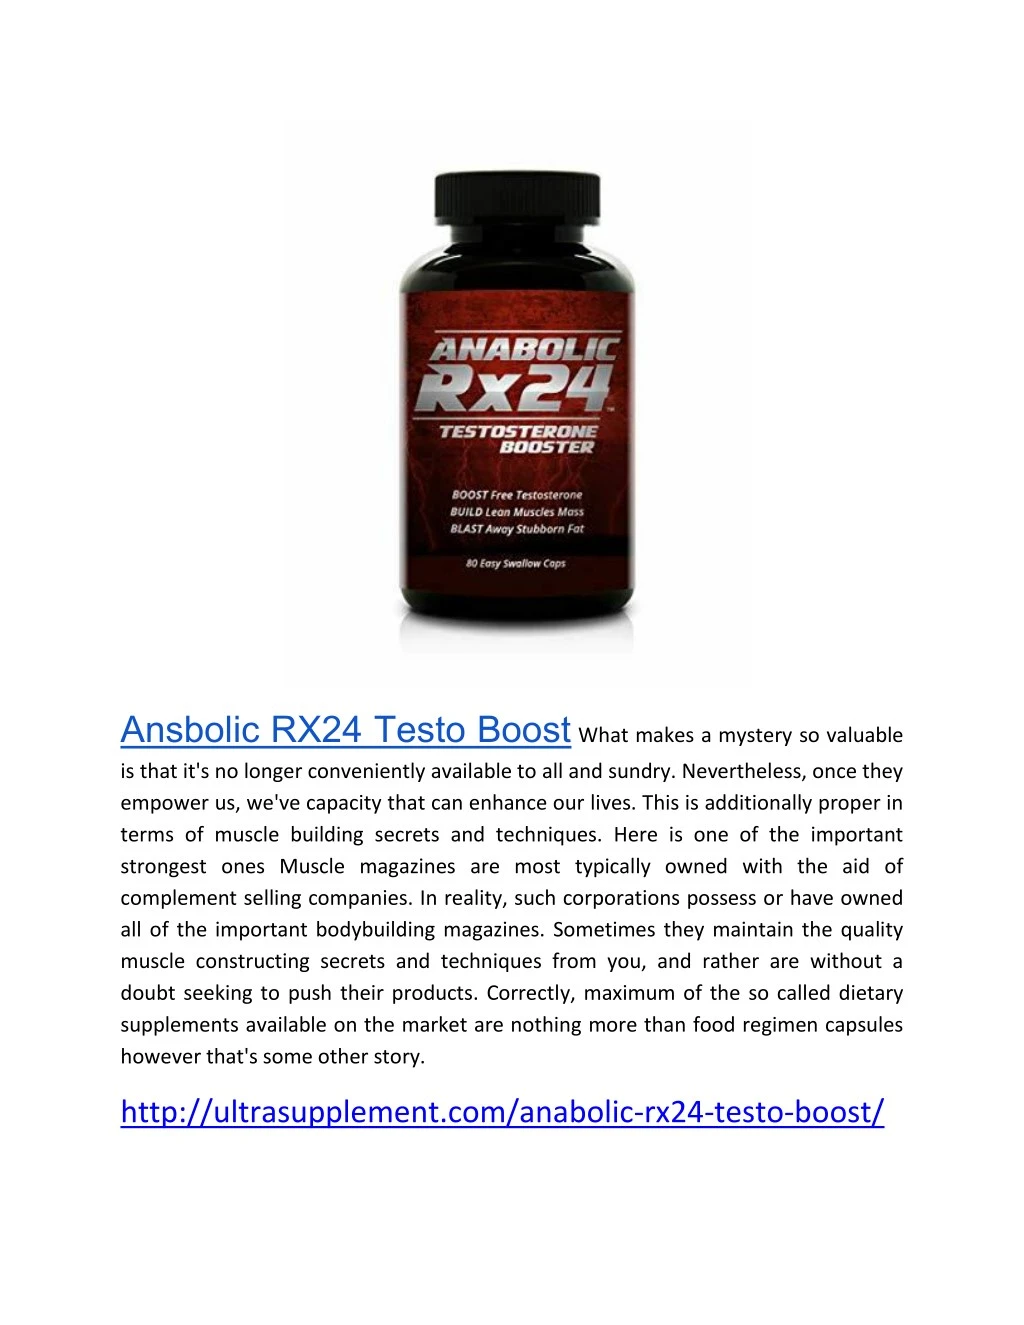 ansbolic rx24 testo boost what makes a mystery